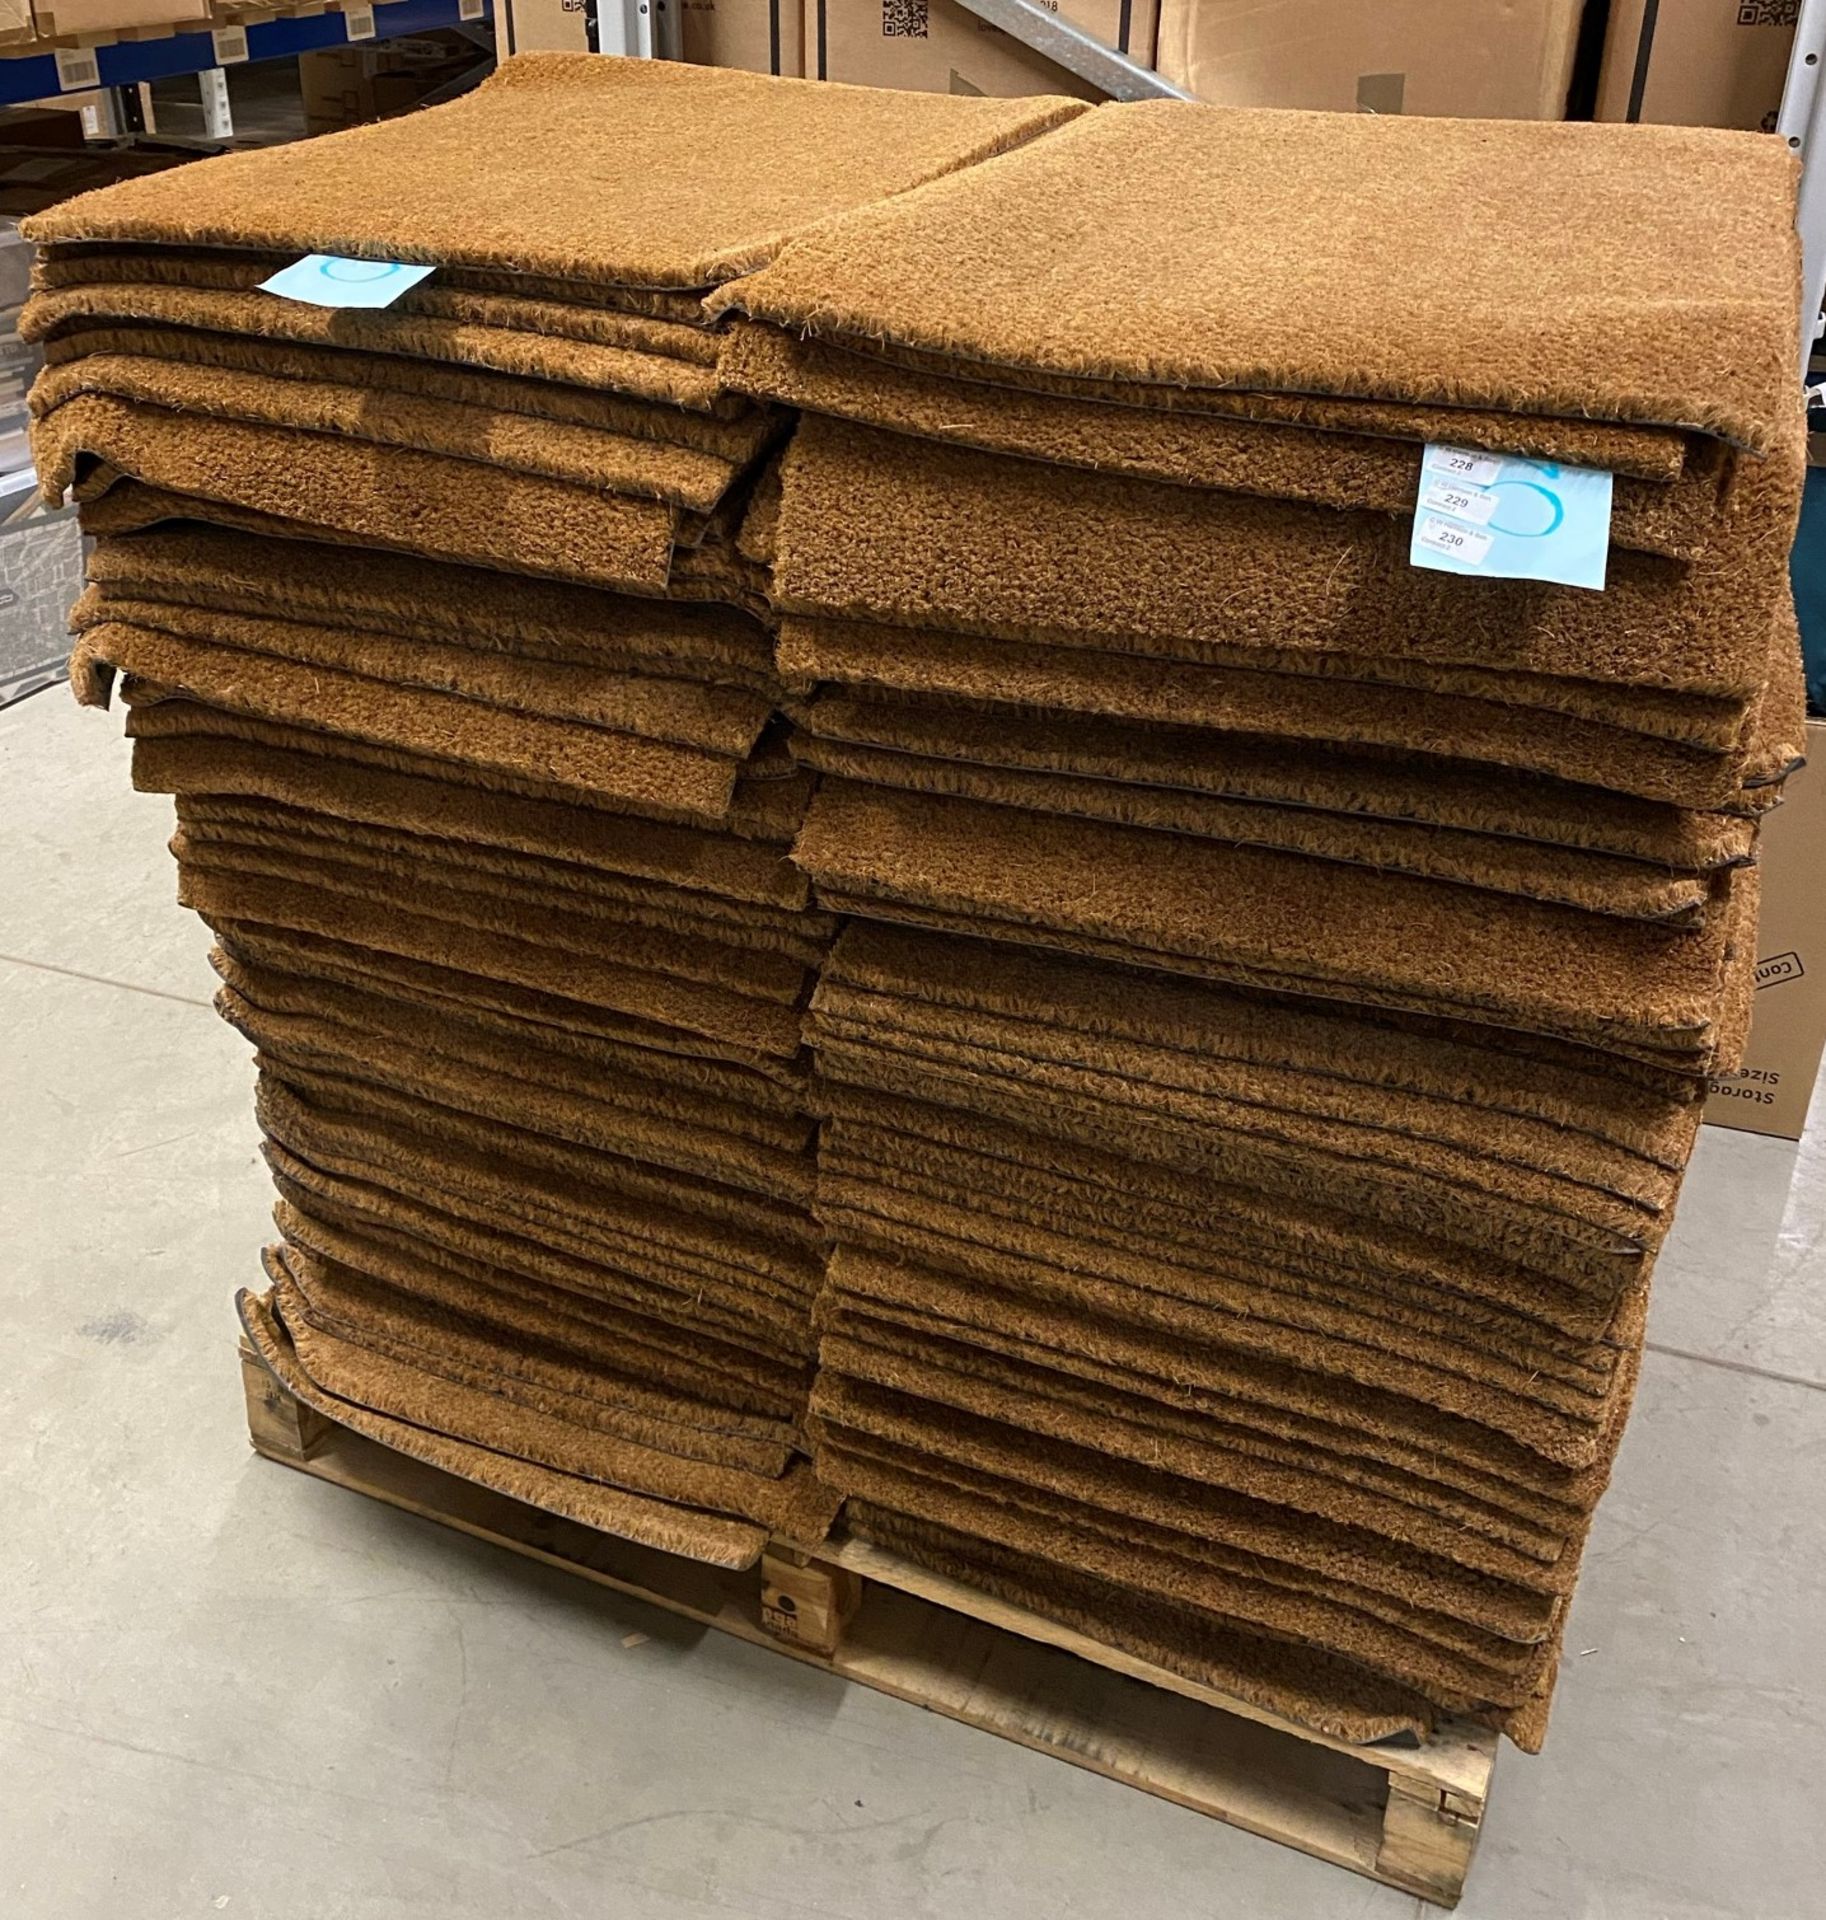 10 x Extra large rubber backed Coir door mats (90cm x 60cm) - Image 5 of 6